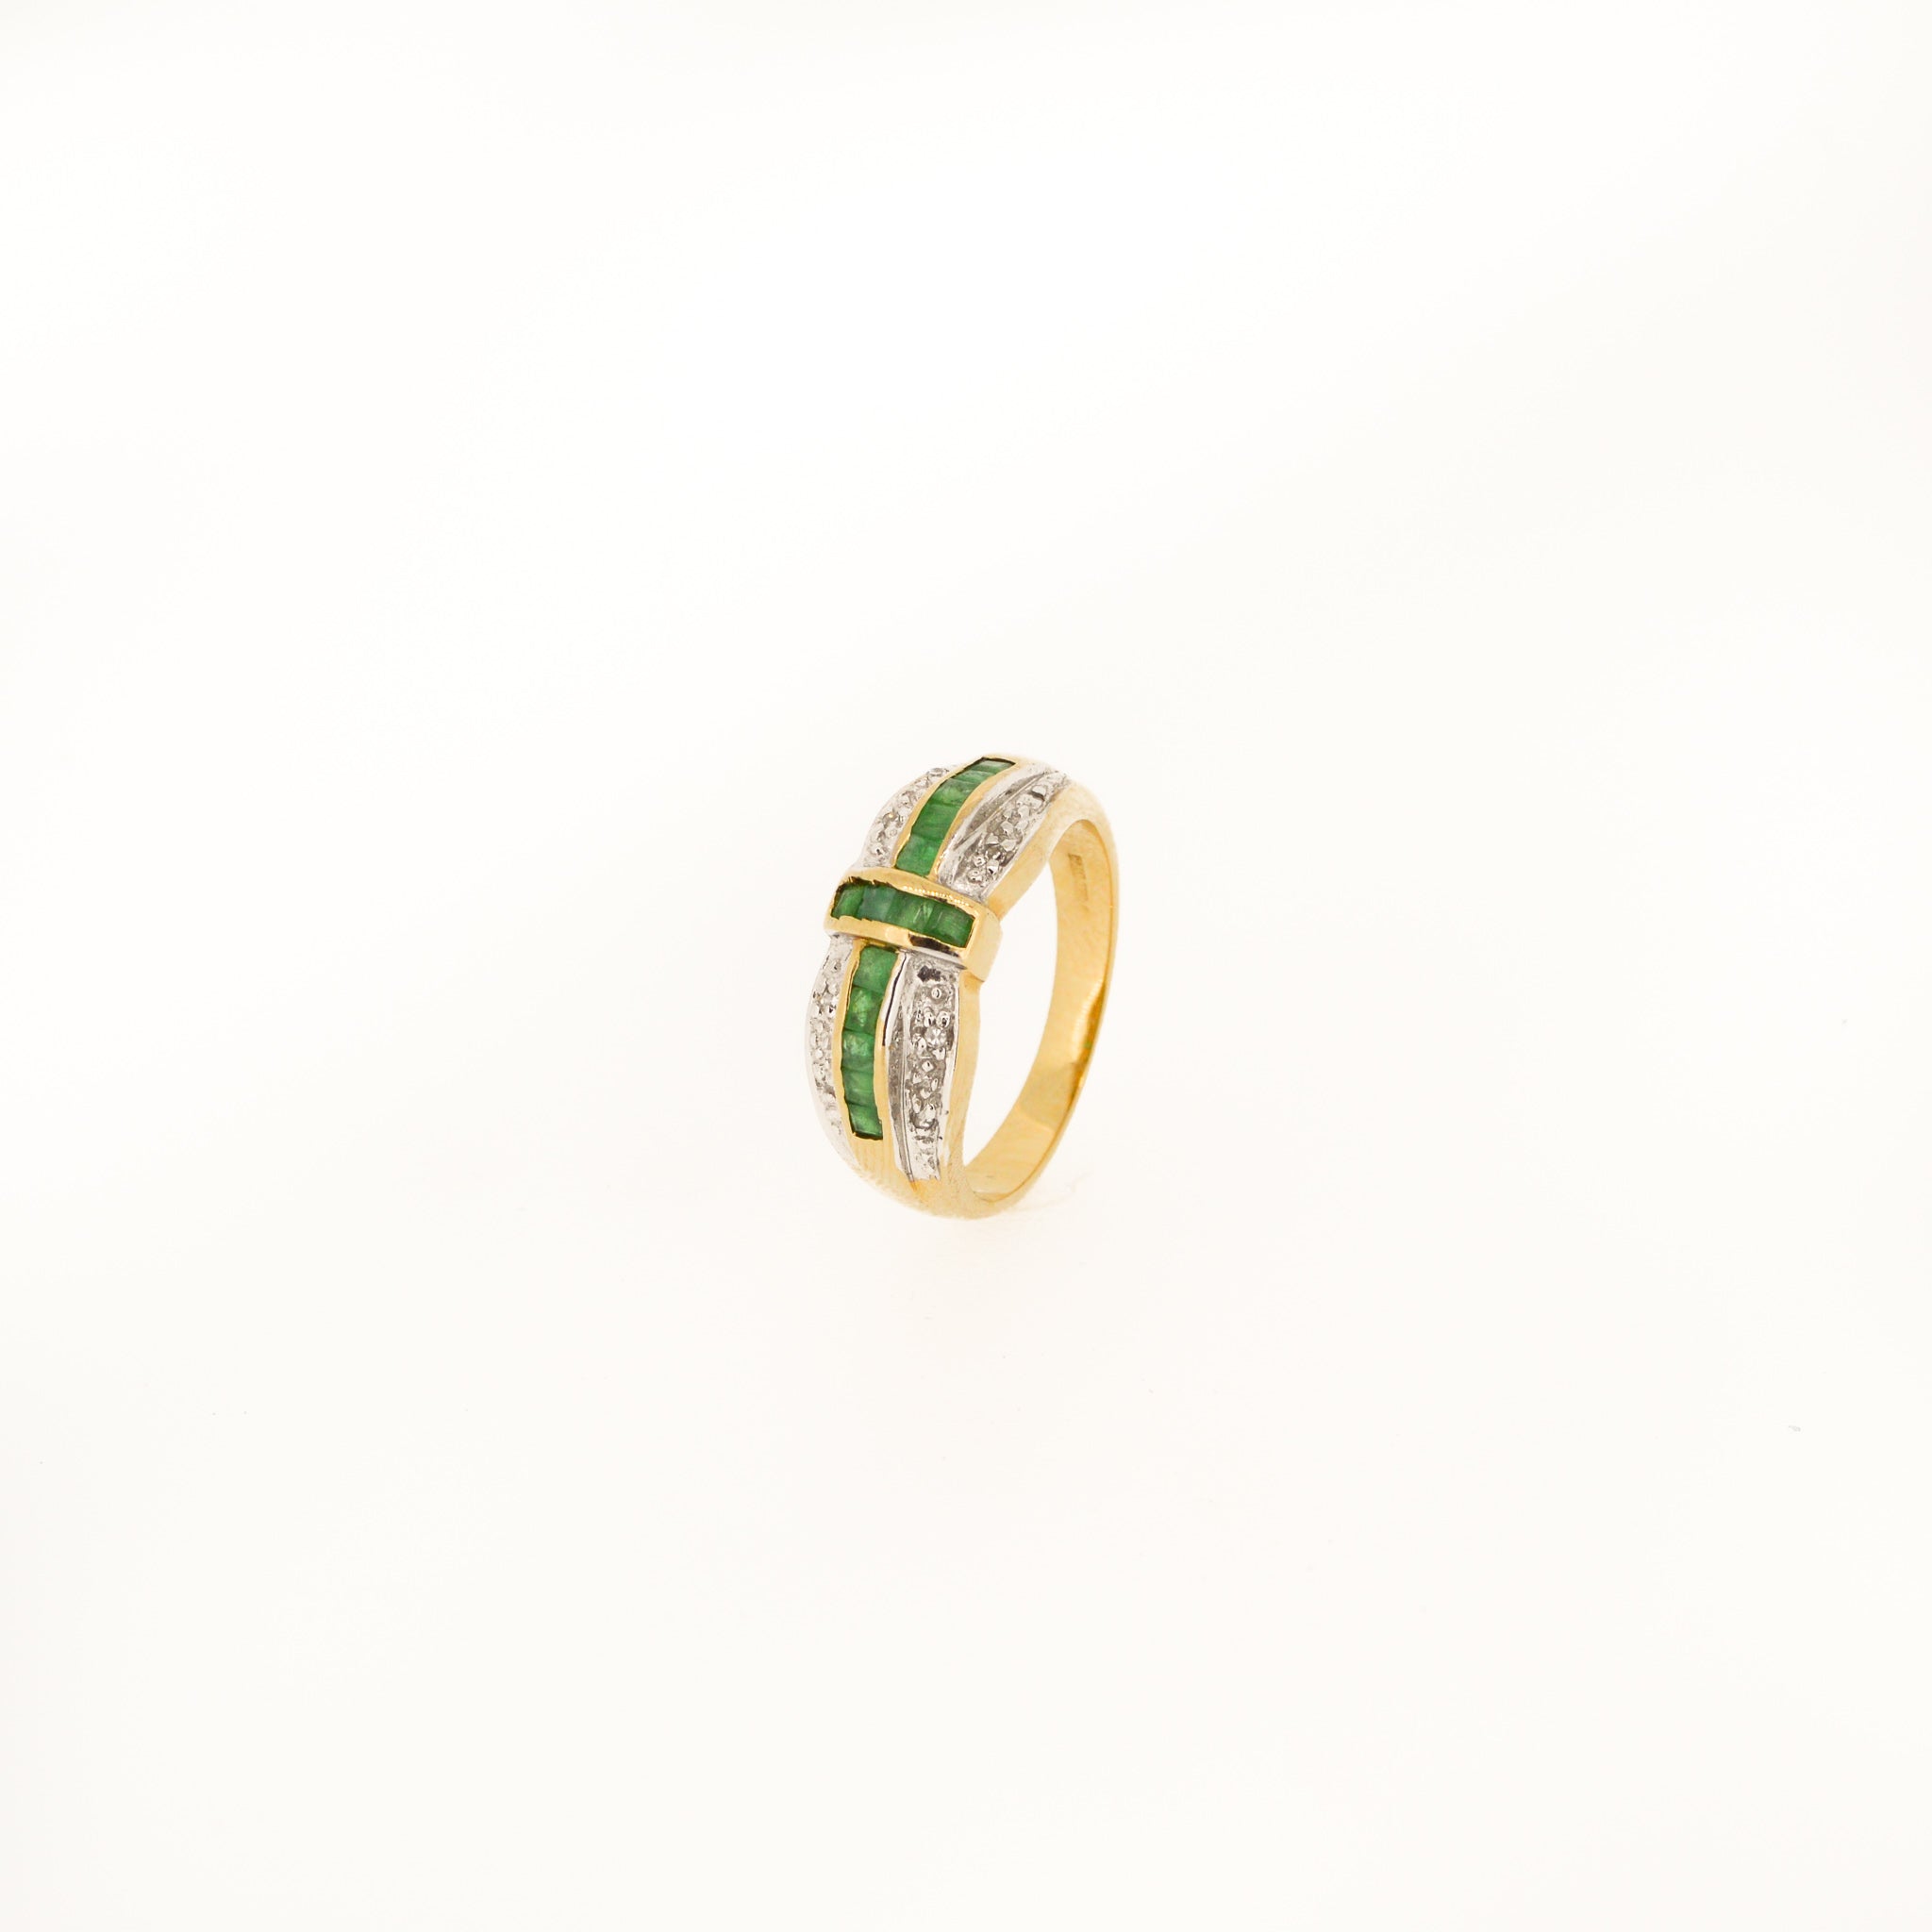 1980's Diamond and Emerald Ring